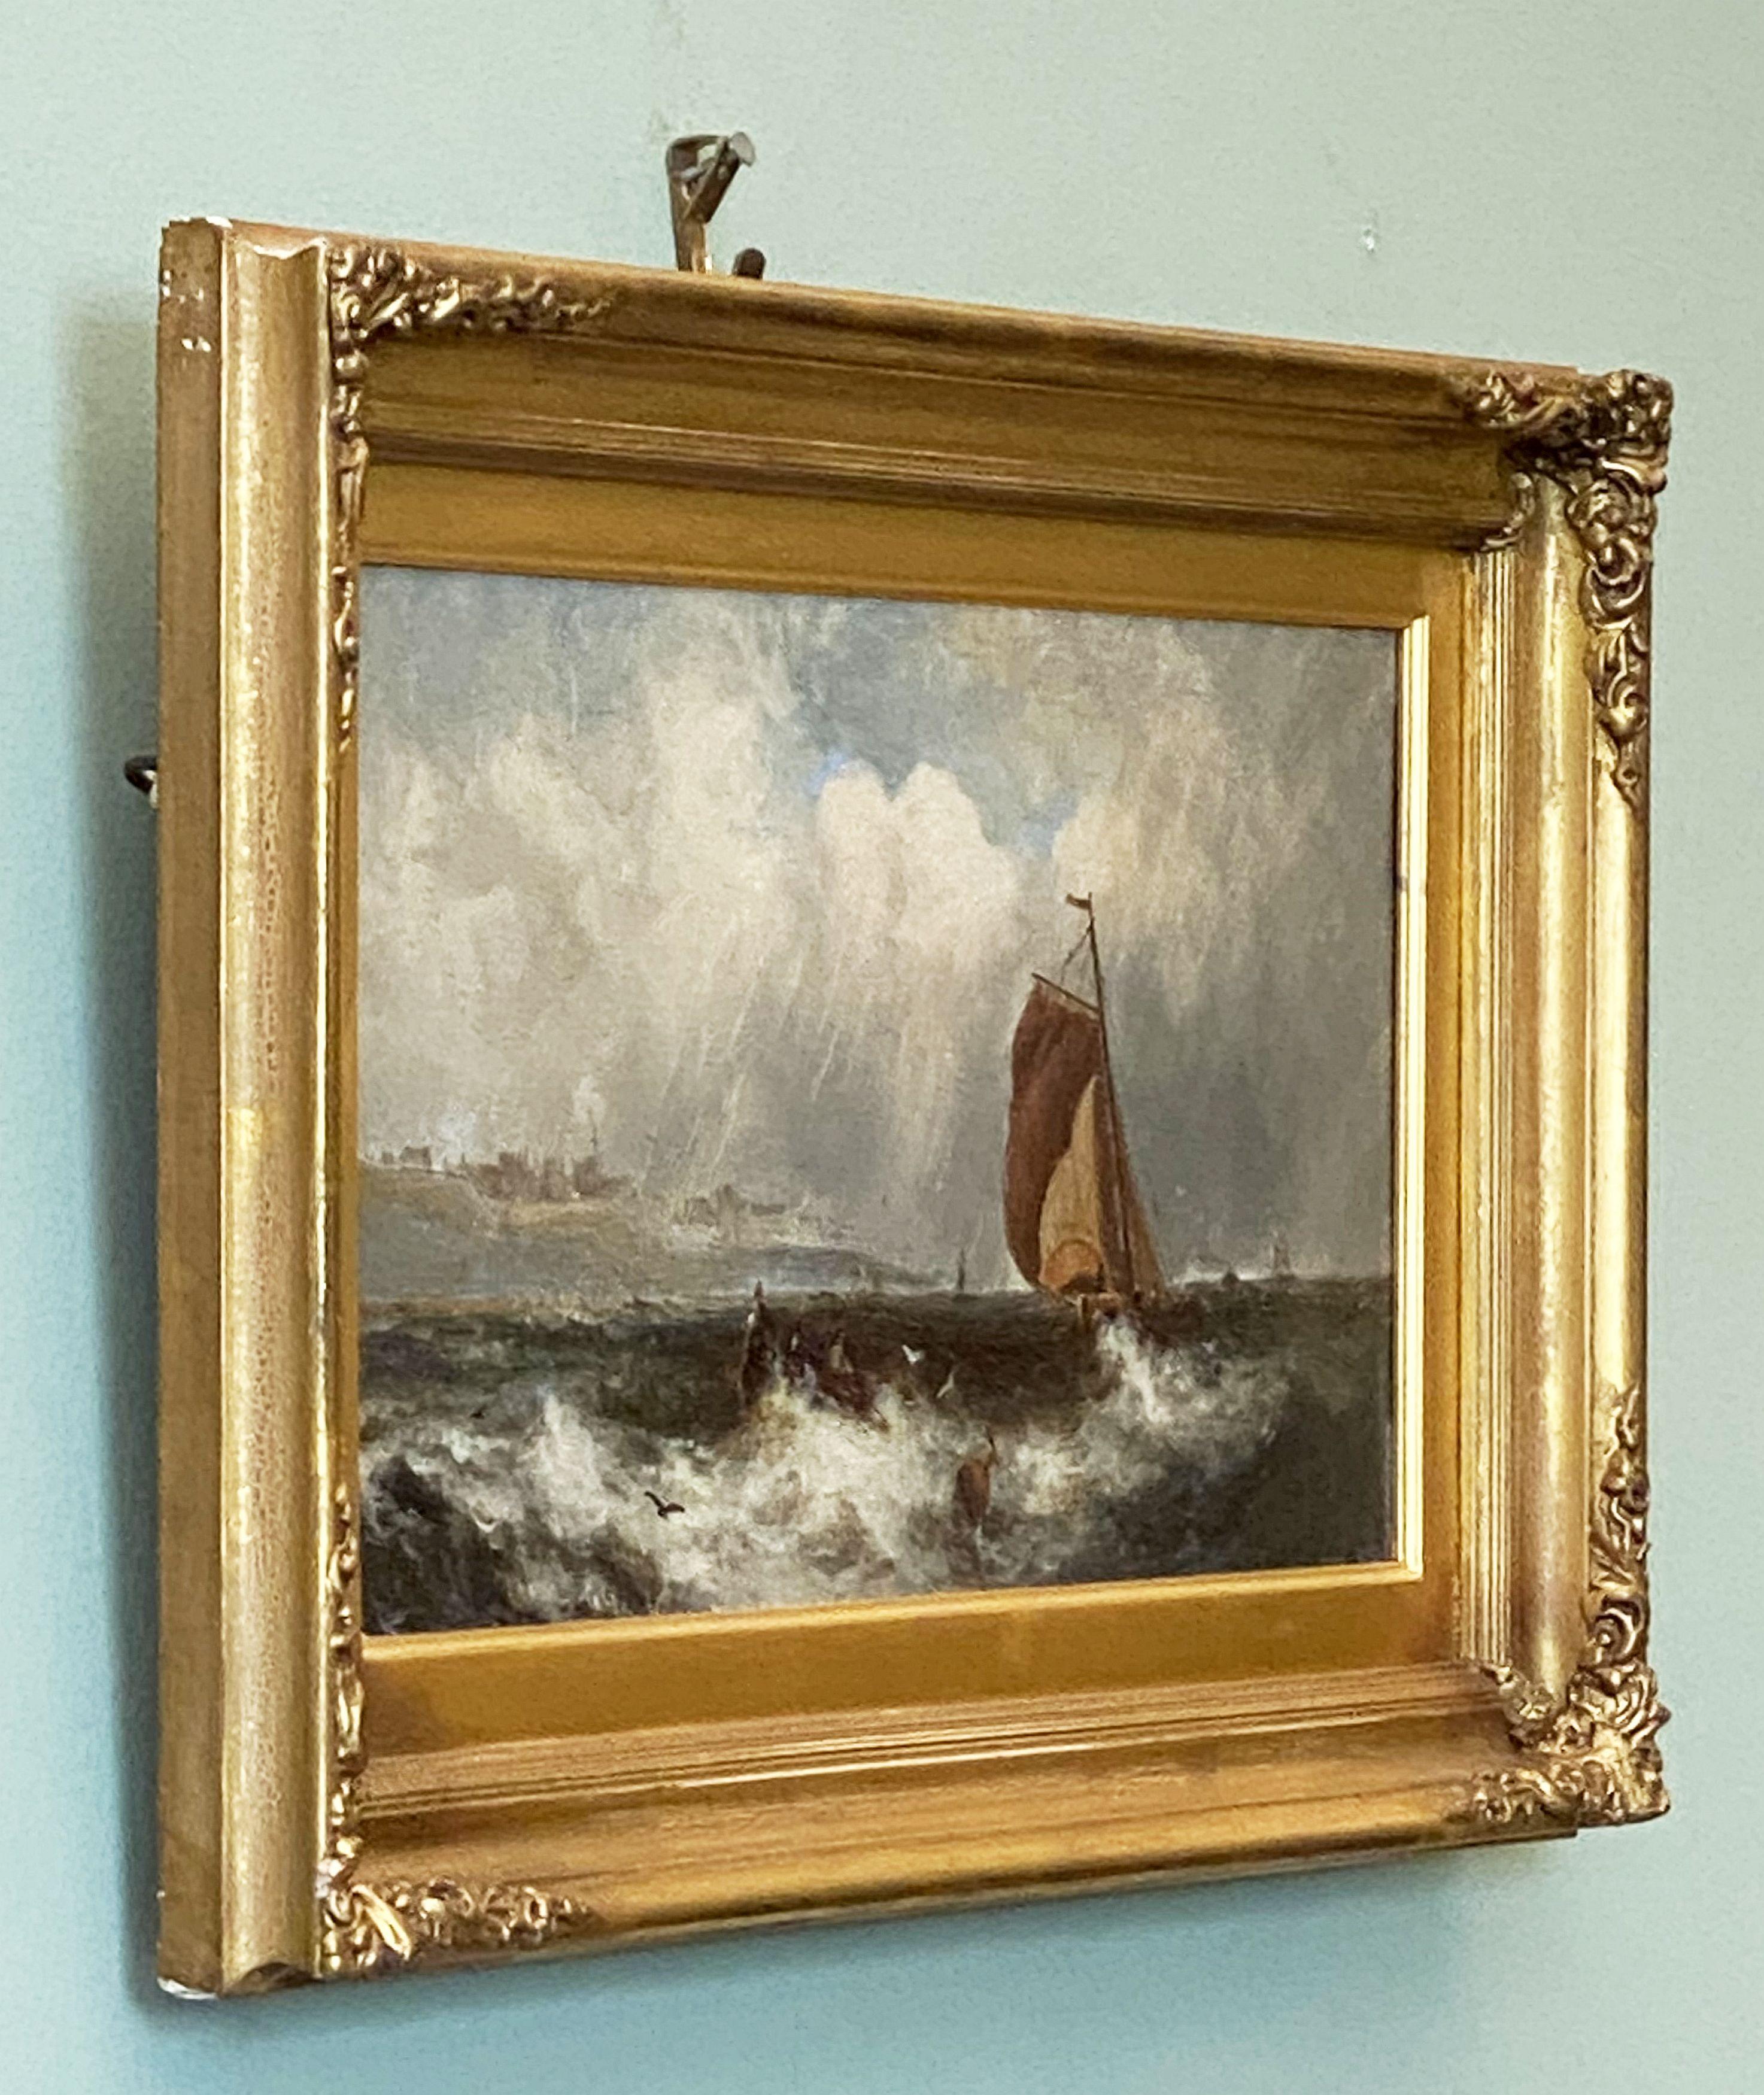 A handsome English oil painting on canvas featuring a seascape or ocean scene with ship, a fine example of British marine art of the 19th century.
Mounted in a giltwood frame.